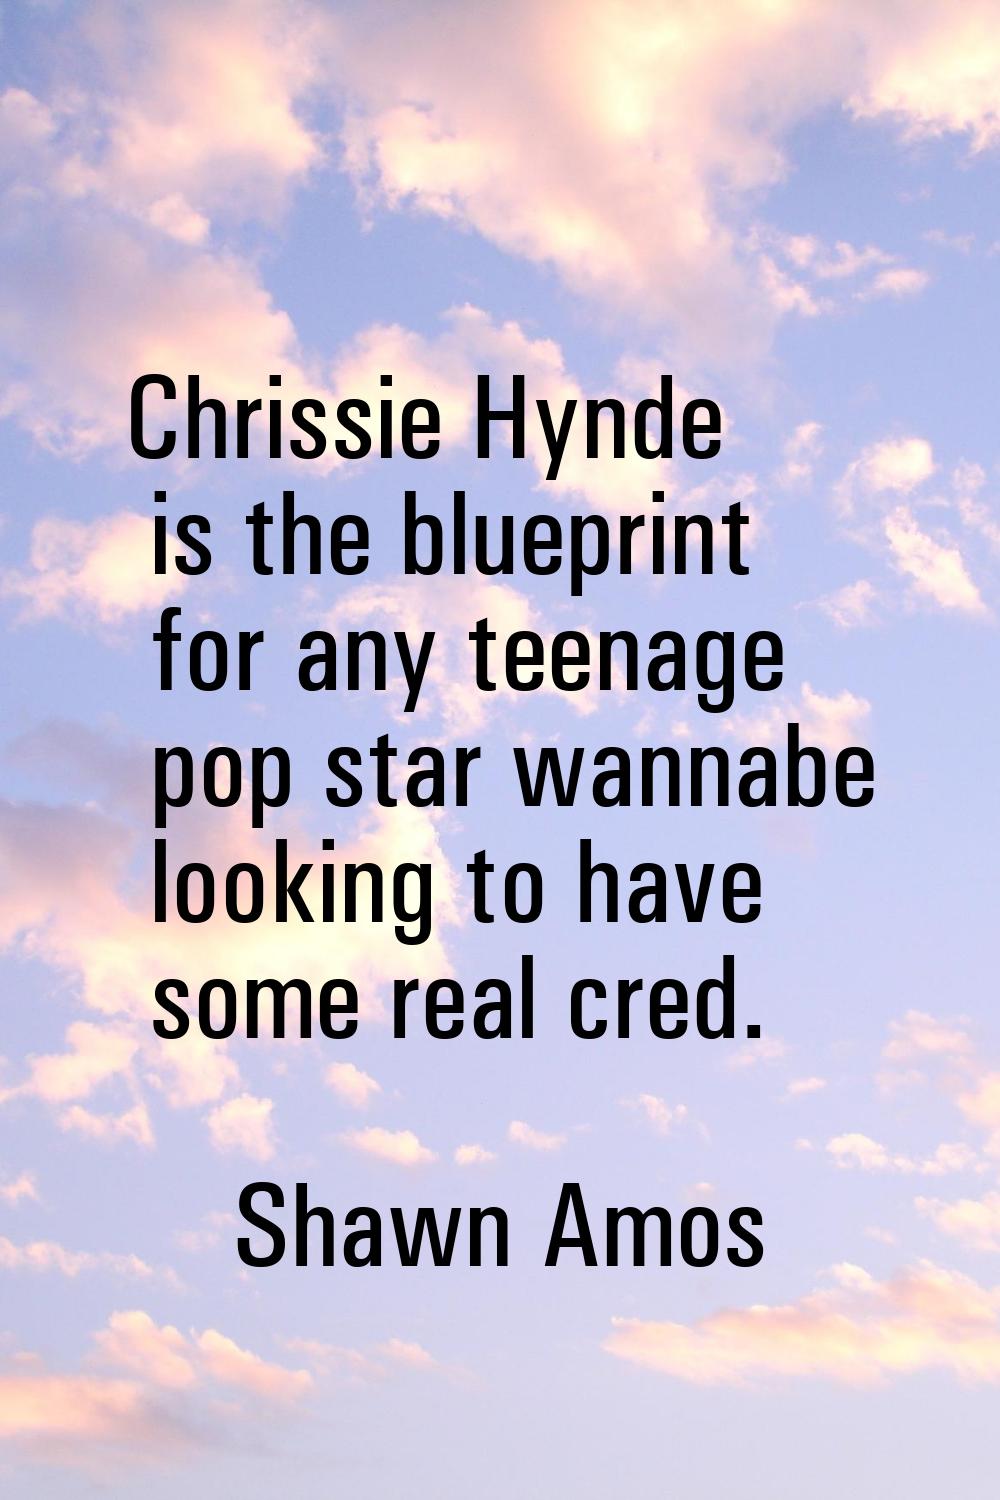 Chrissie Hynde is the blueprint for any teenage pop star wannabe looking to have some real cred.